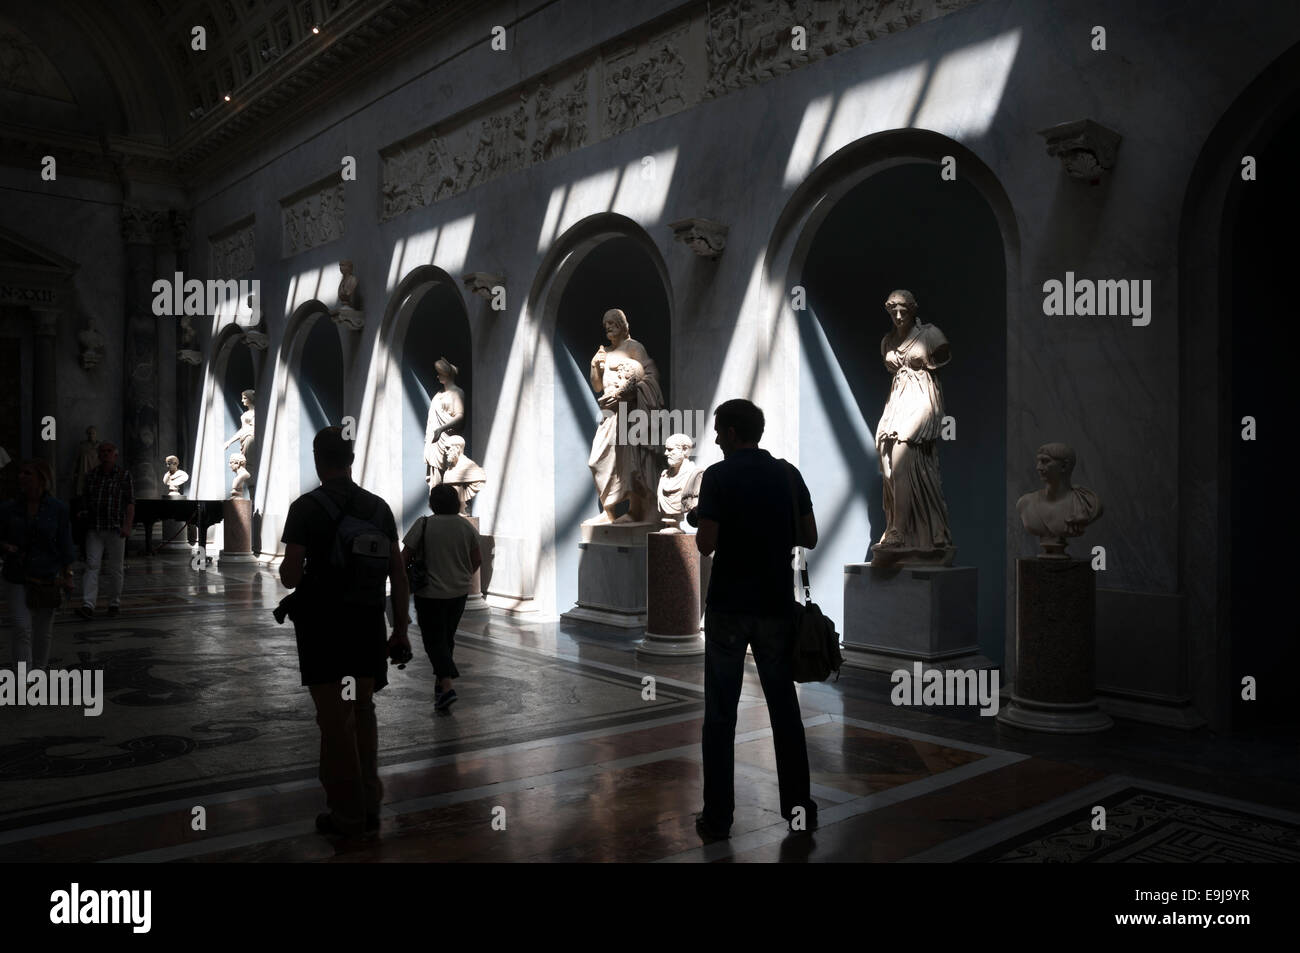 Rome, Italy - May 16, 2012: Visitors at Vatican Museums, The New Wing ( Braccio Nuovo) Stock Photo